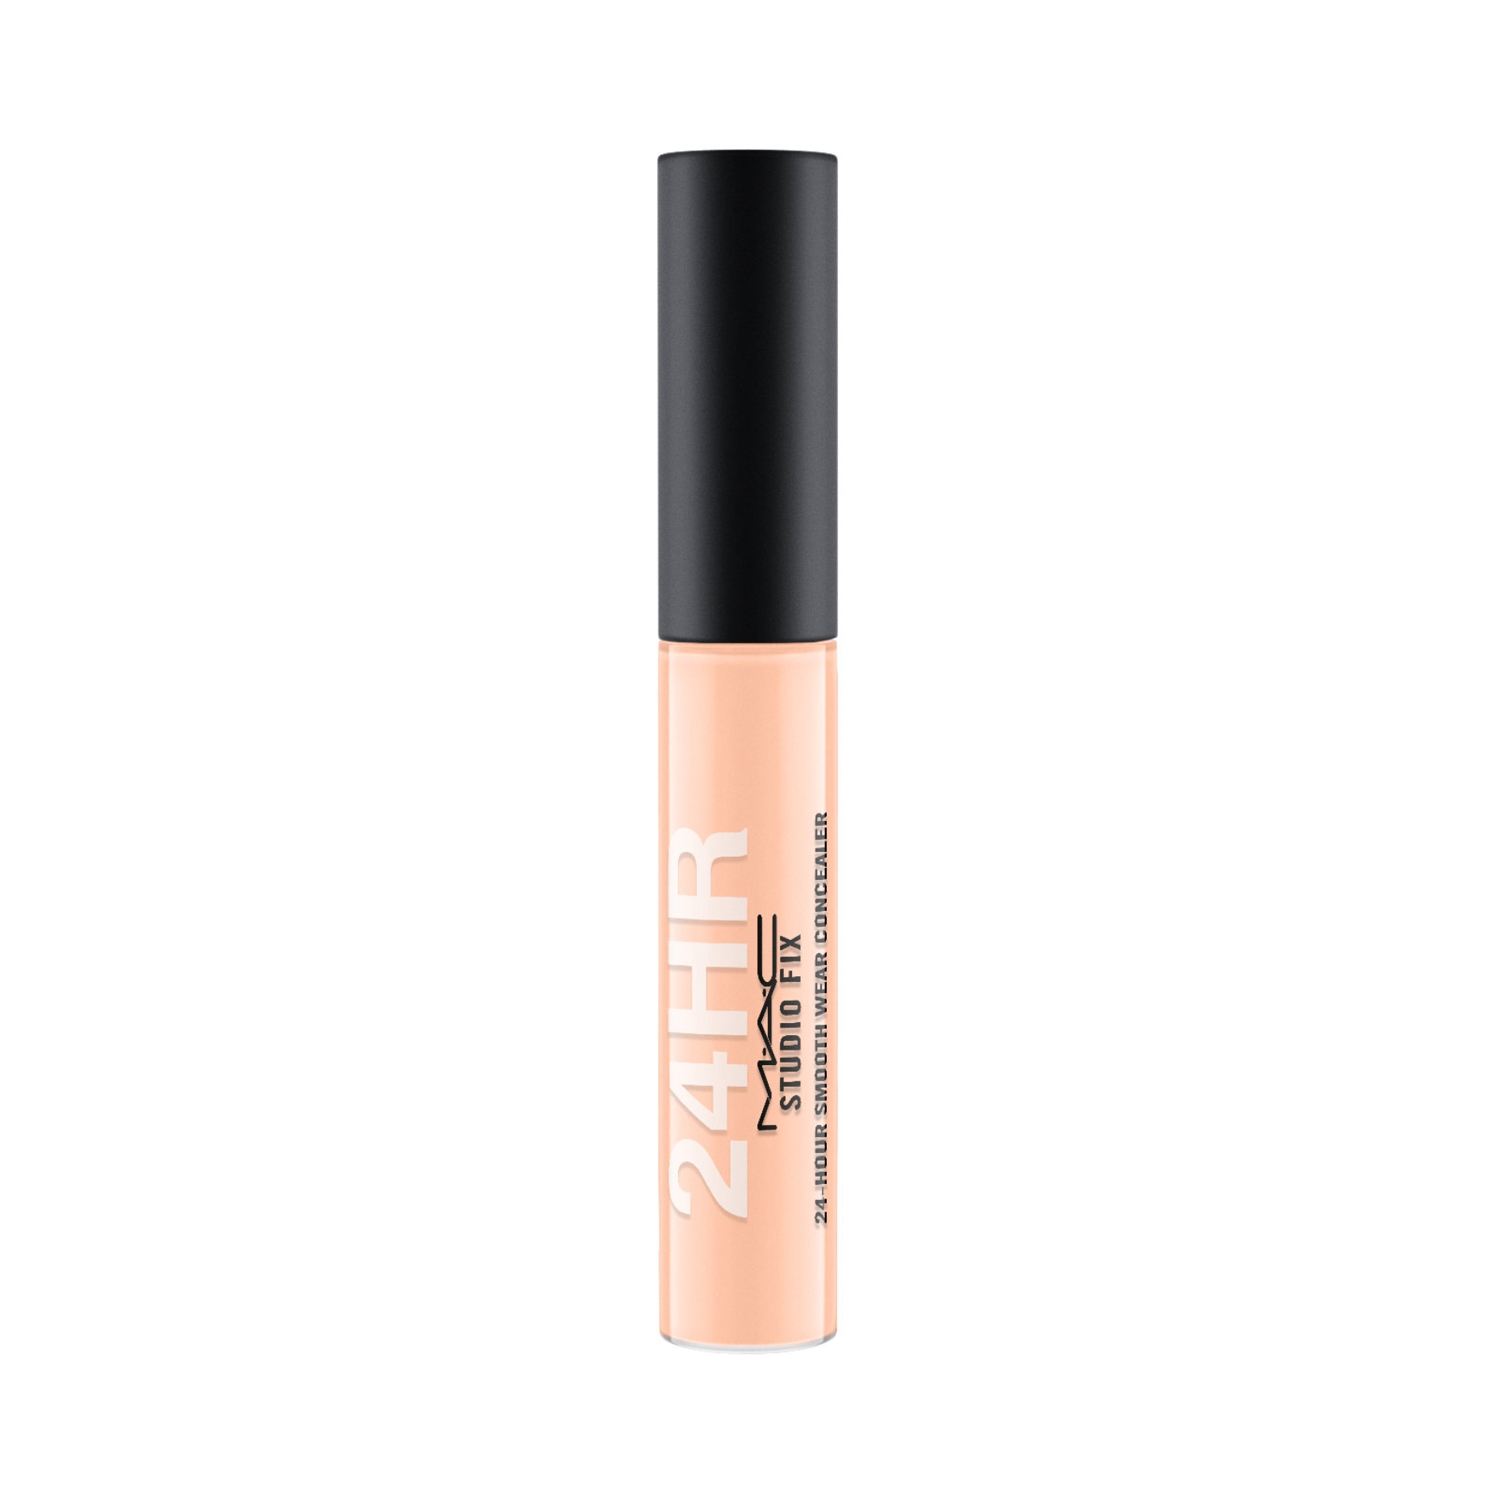 M.A.C | M.A.C Studio Fix 24-Hour Smooth Wear Concealer - NW24 (7ml)